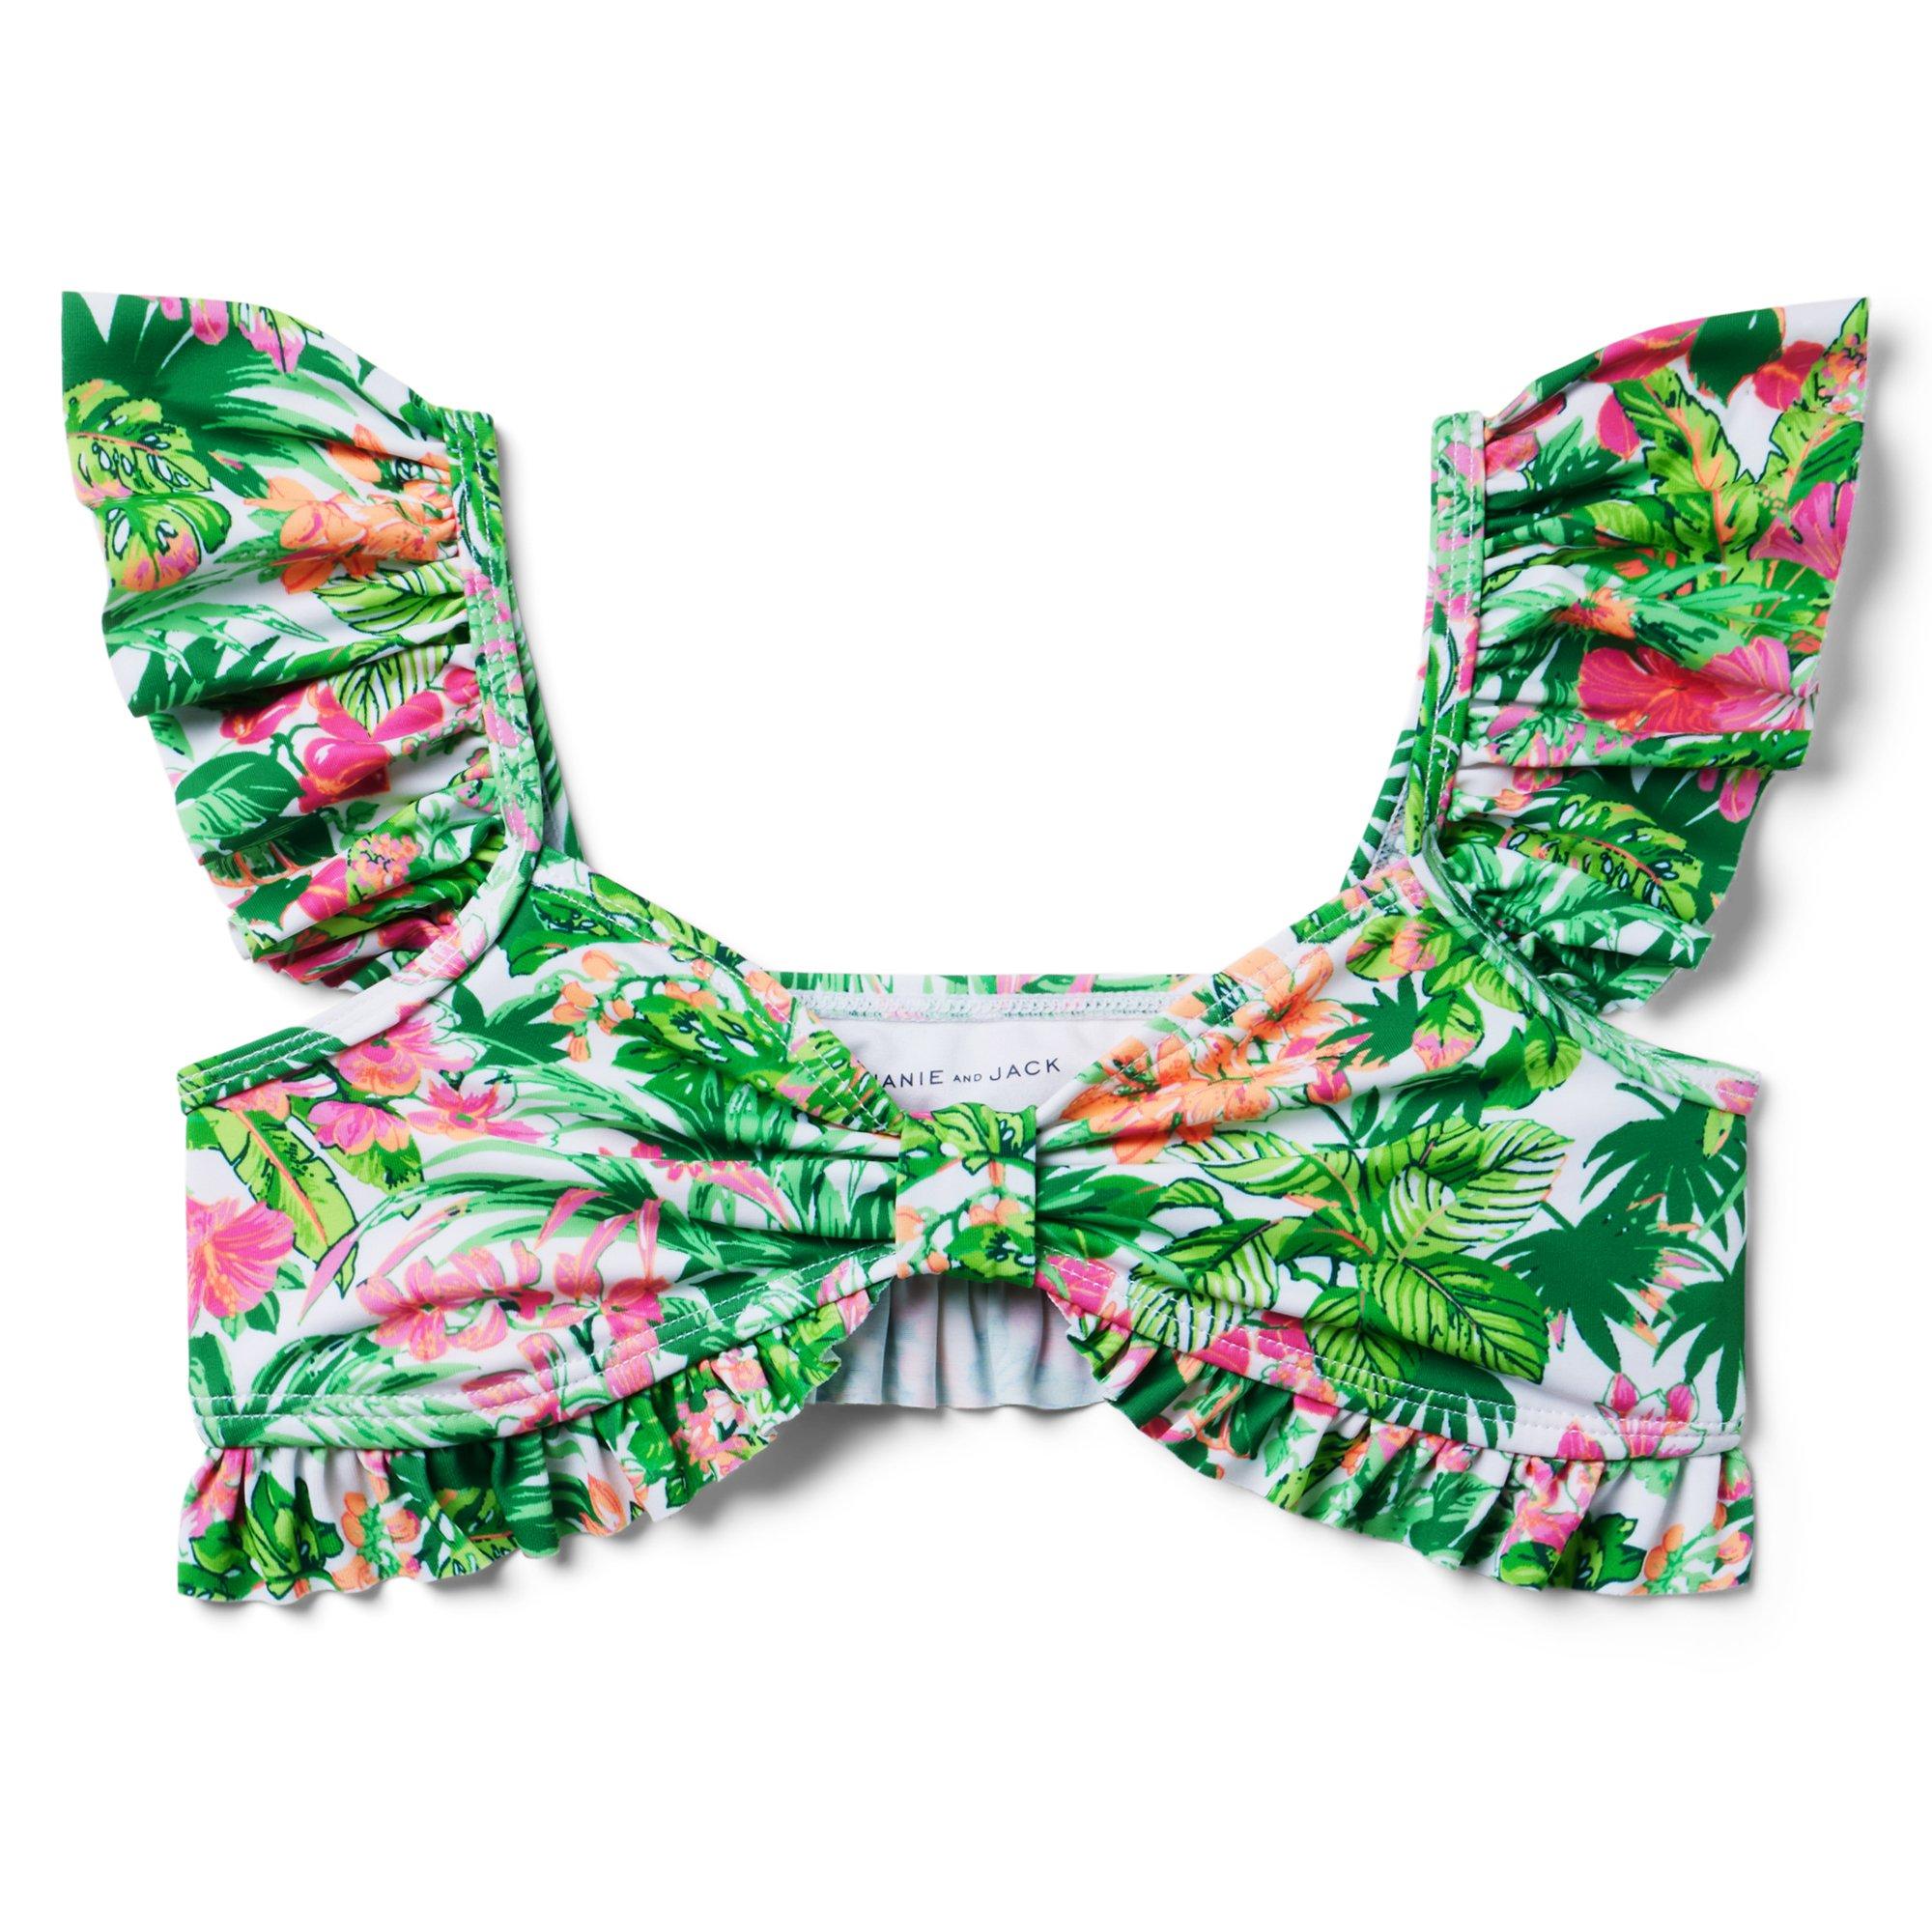 Recycled Tropical Floral 2-Piece Swimsuit